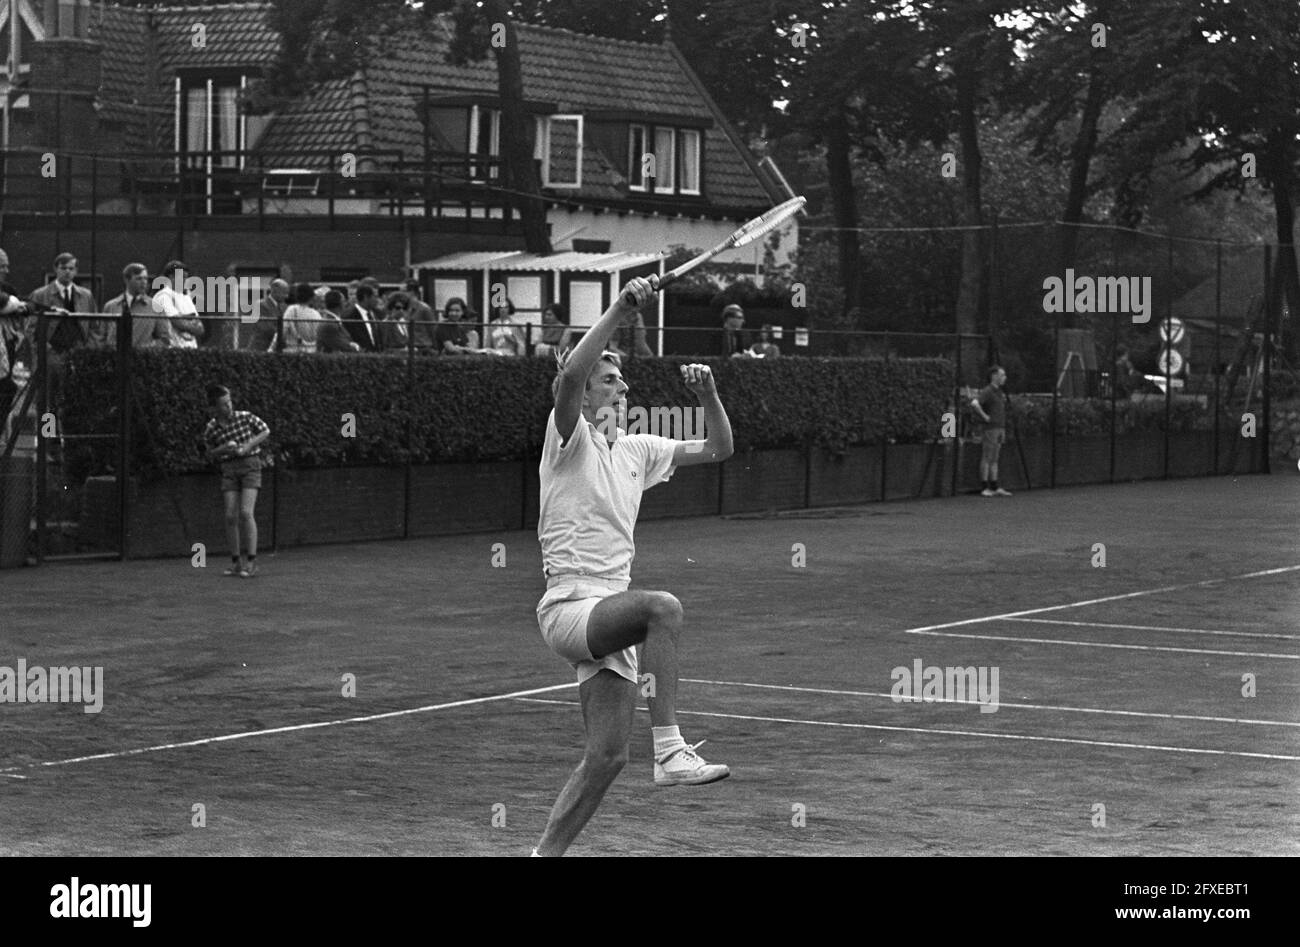 Tennis tournament in Hilversum, the Dutchman Evert Schneid in action, July 19, 1965, tennis, tournaments, The Netherlands, 20th century press agency photo, news to remember, documentary, historic photography 1945-1990, visual stories, human history of the Twentieth Century, capturing moments in time Stock Photo